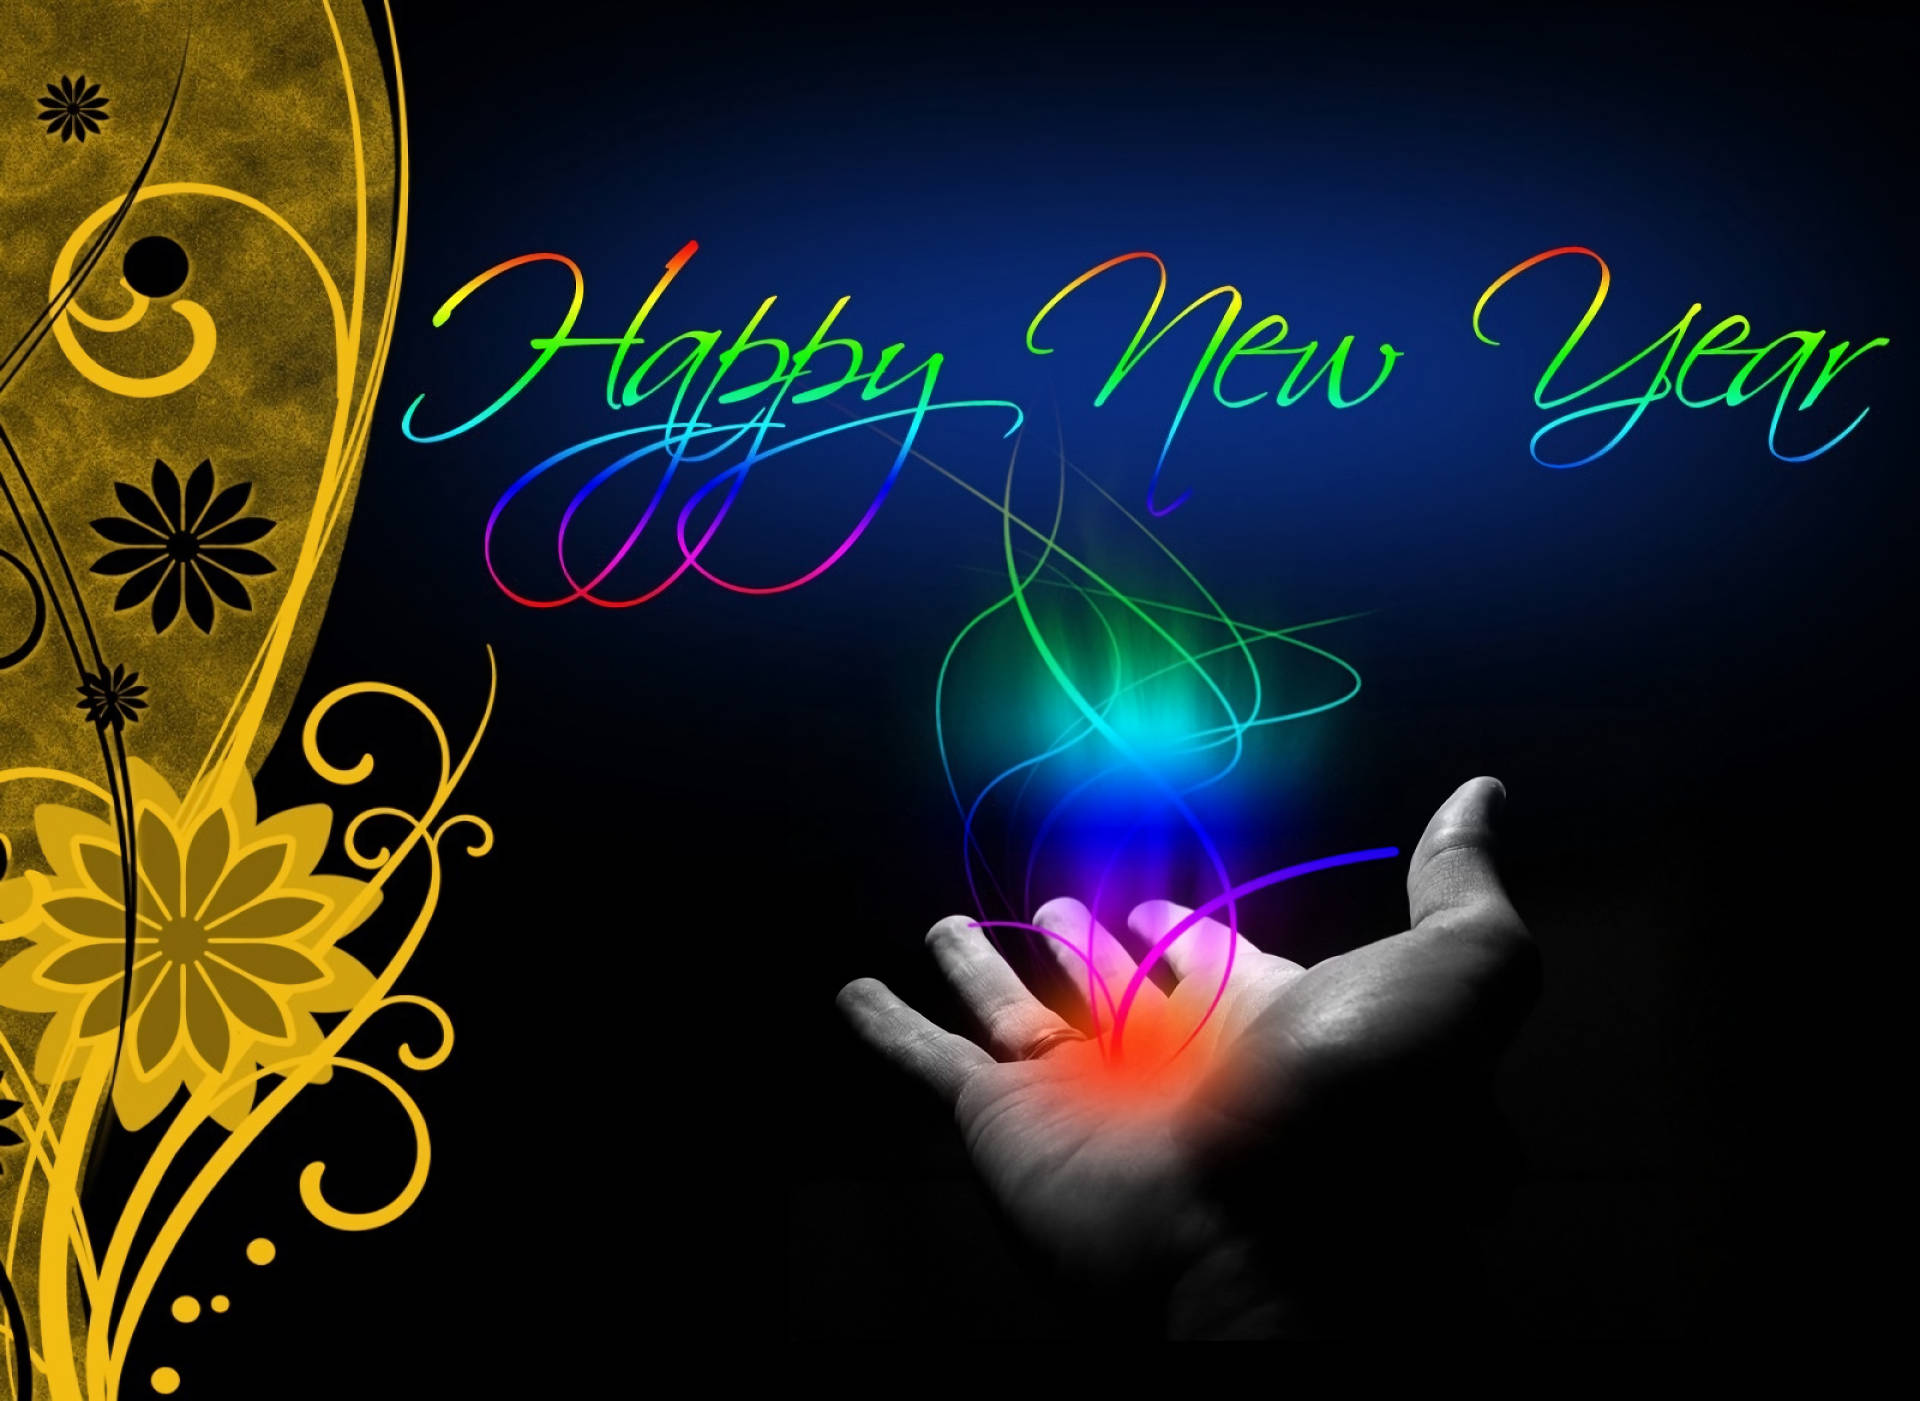 50 Beautiful Happy New Year Wallpapers for your desktop - part 2